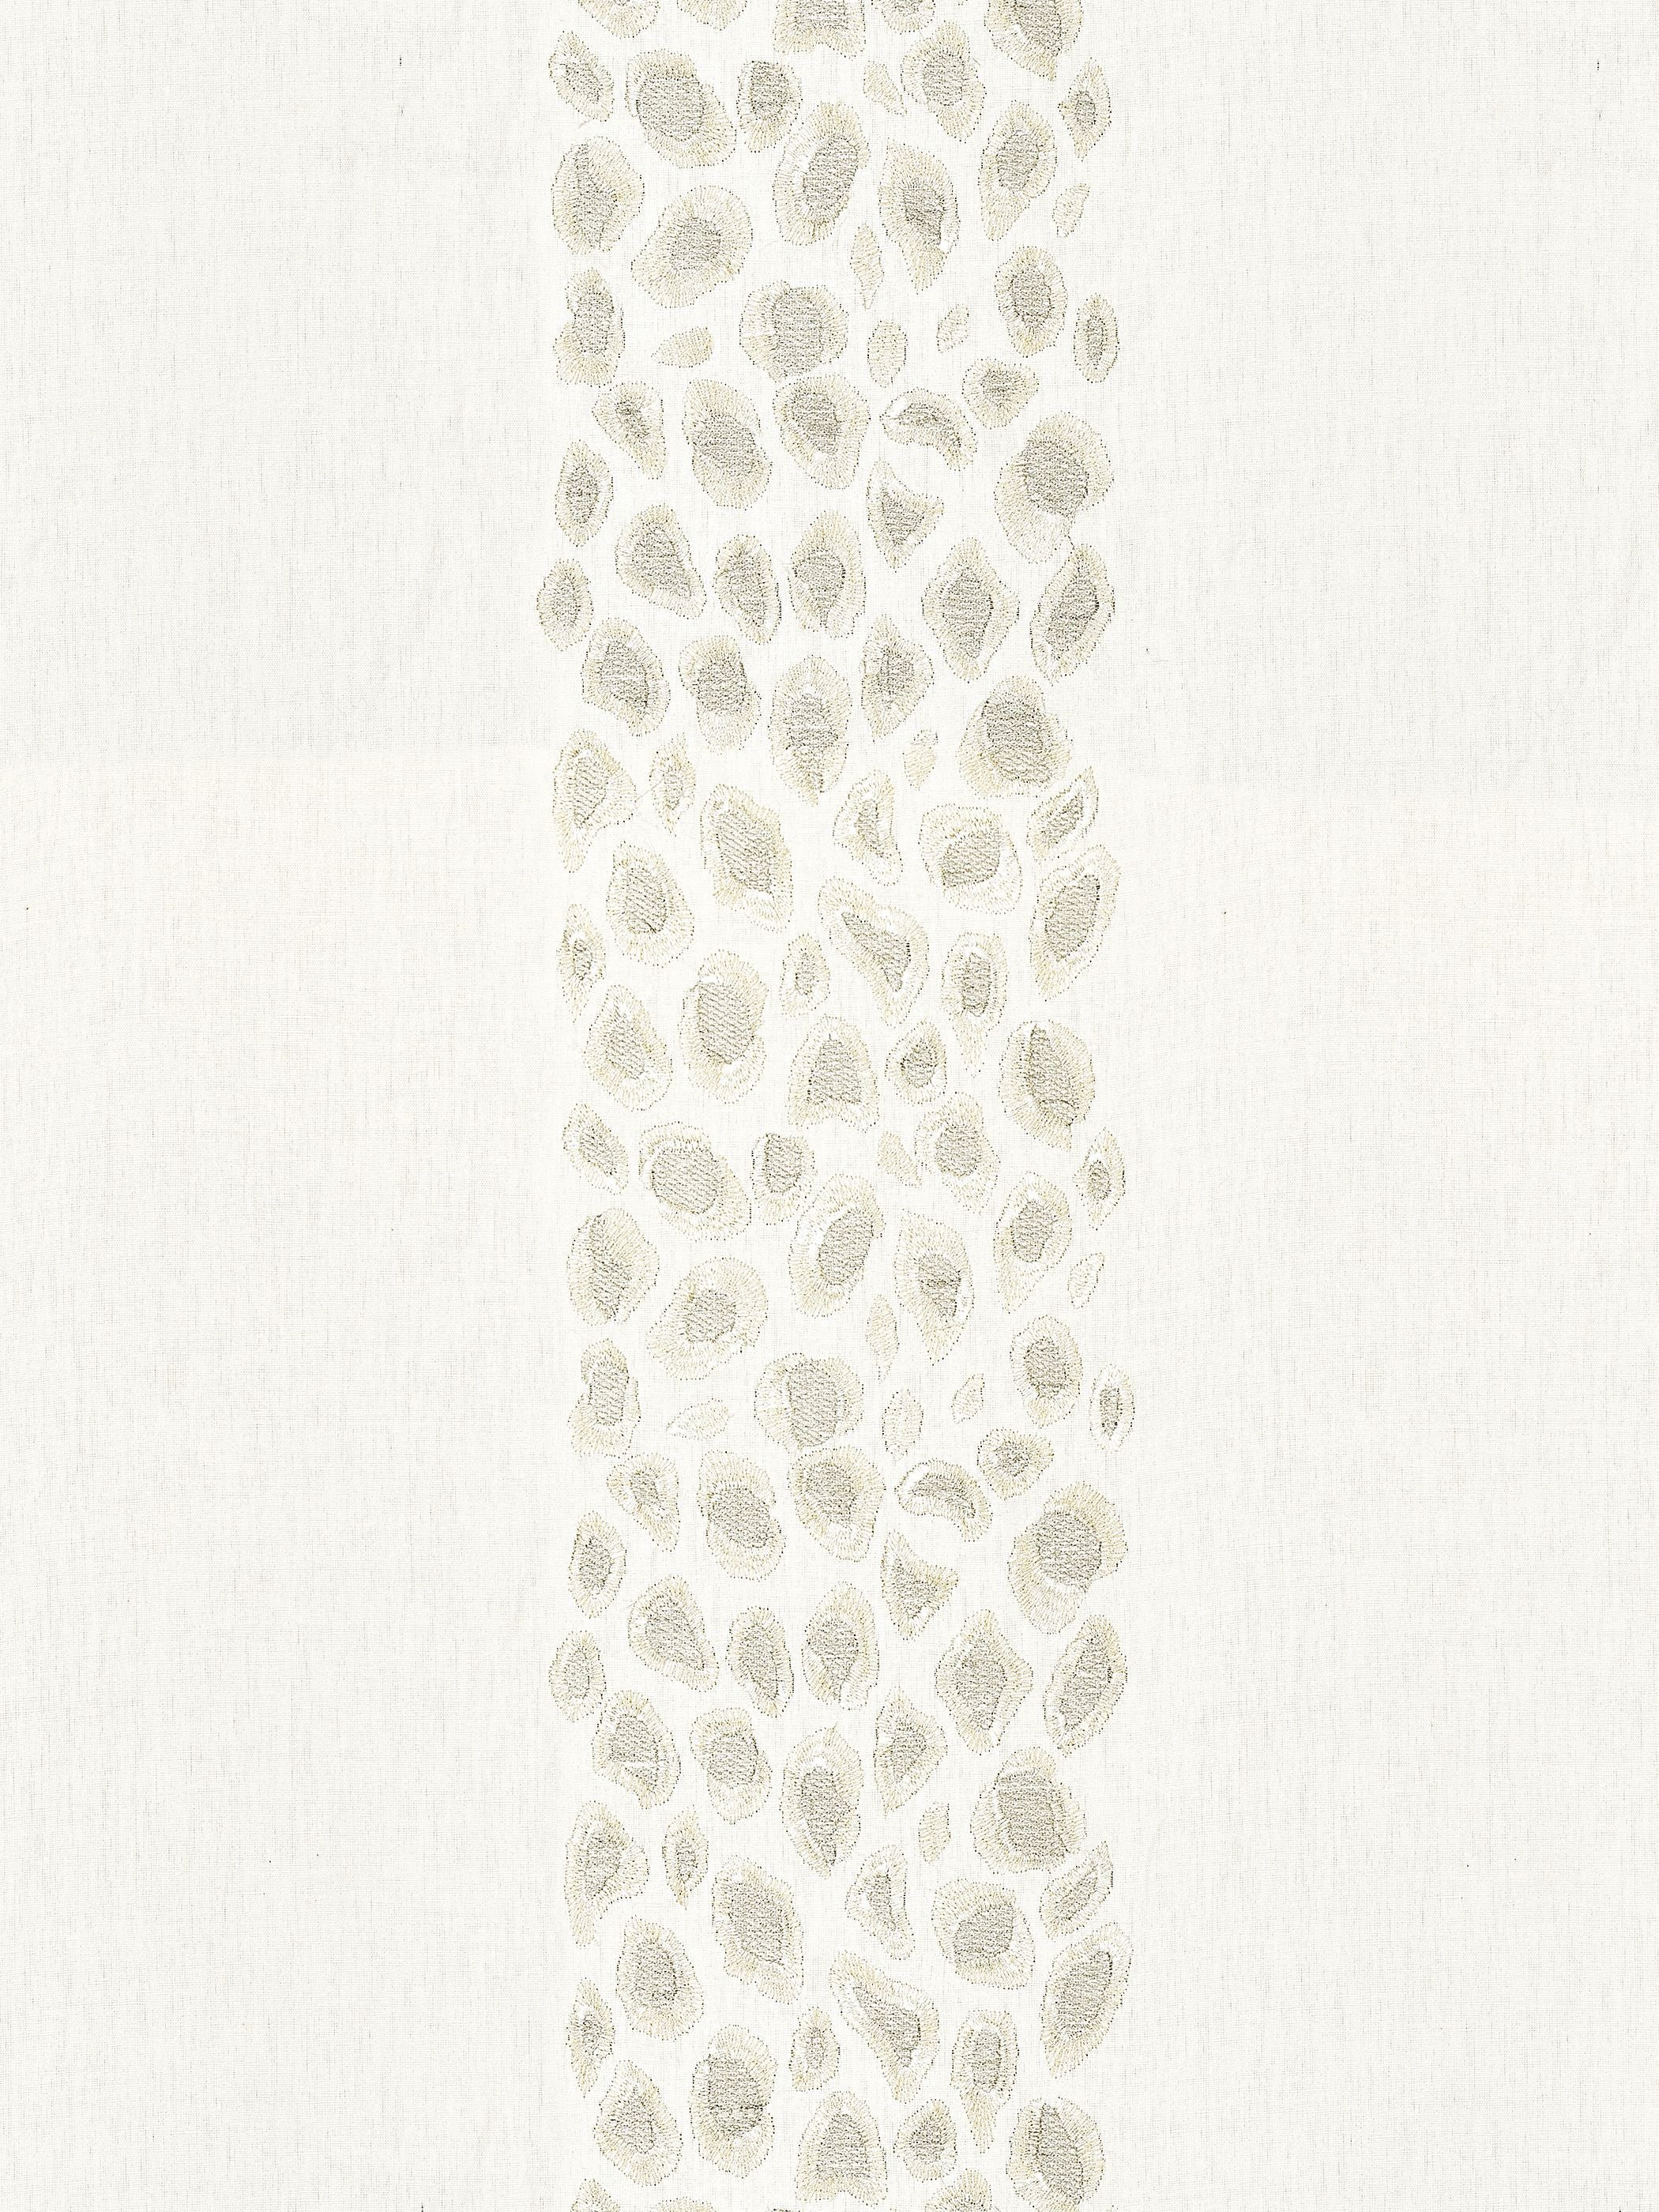 Catwalk Embroidery fabric in pearl color - pattern number SC 000127255 - by Scalamandre in the Scalamandre Fabrics Book 1 collection